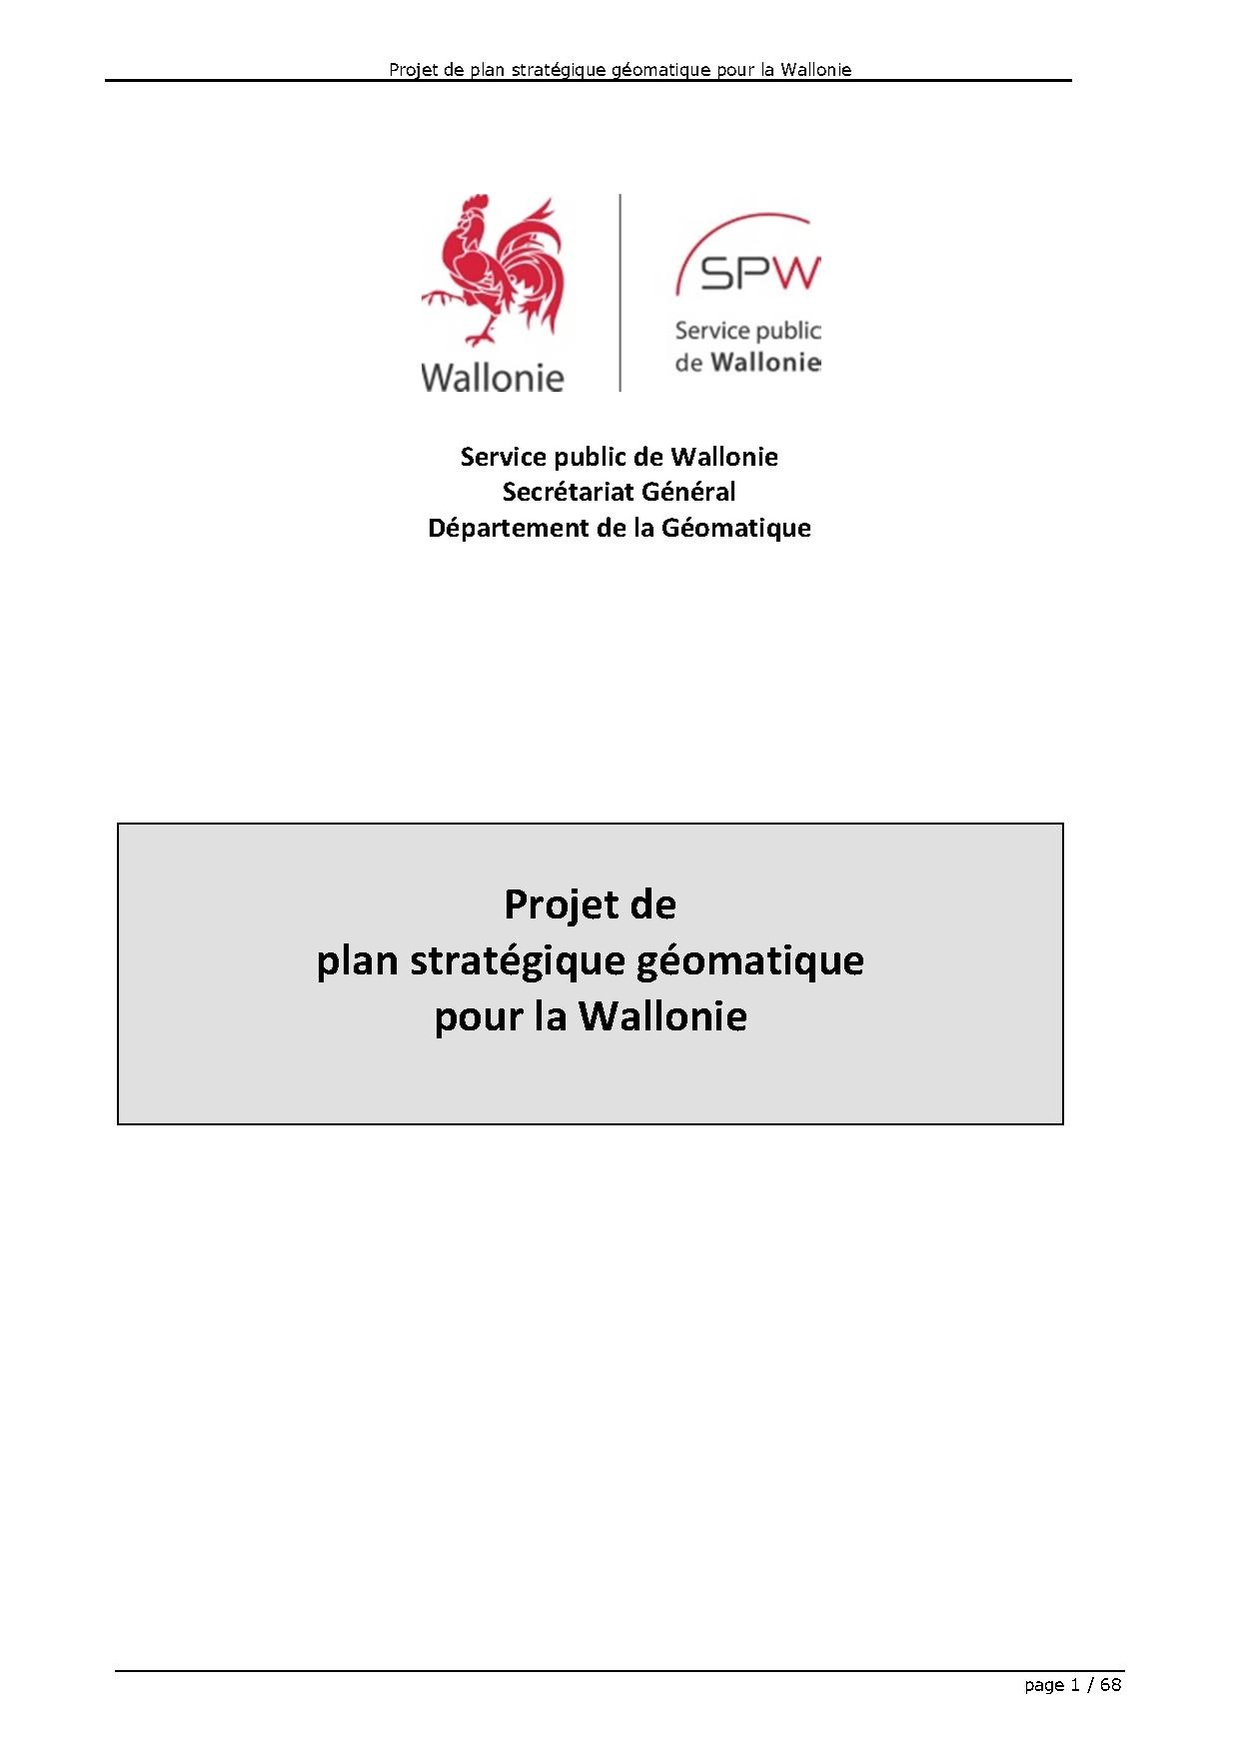 "project of strategic plan for the Wallon's geomatica"